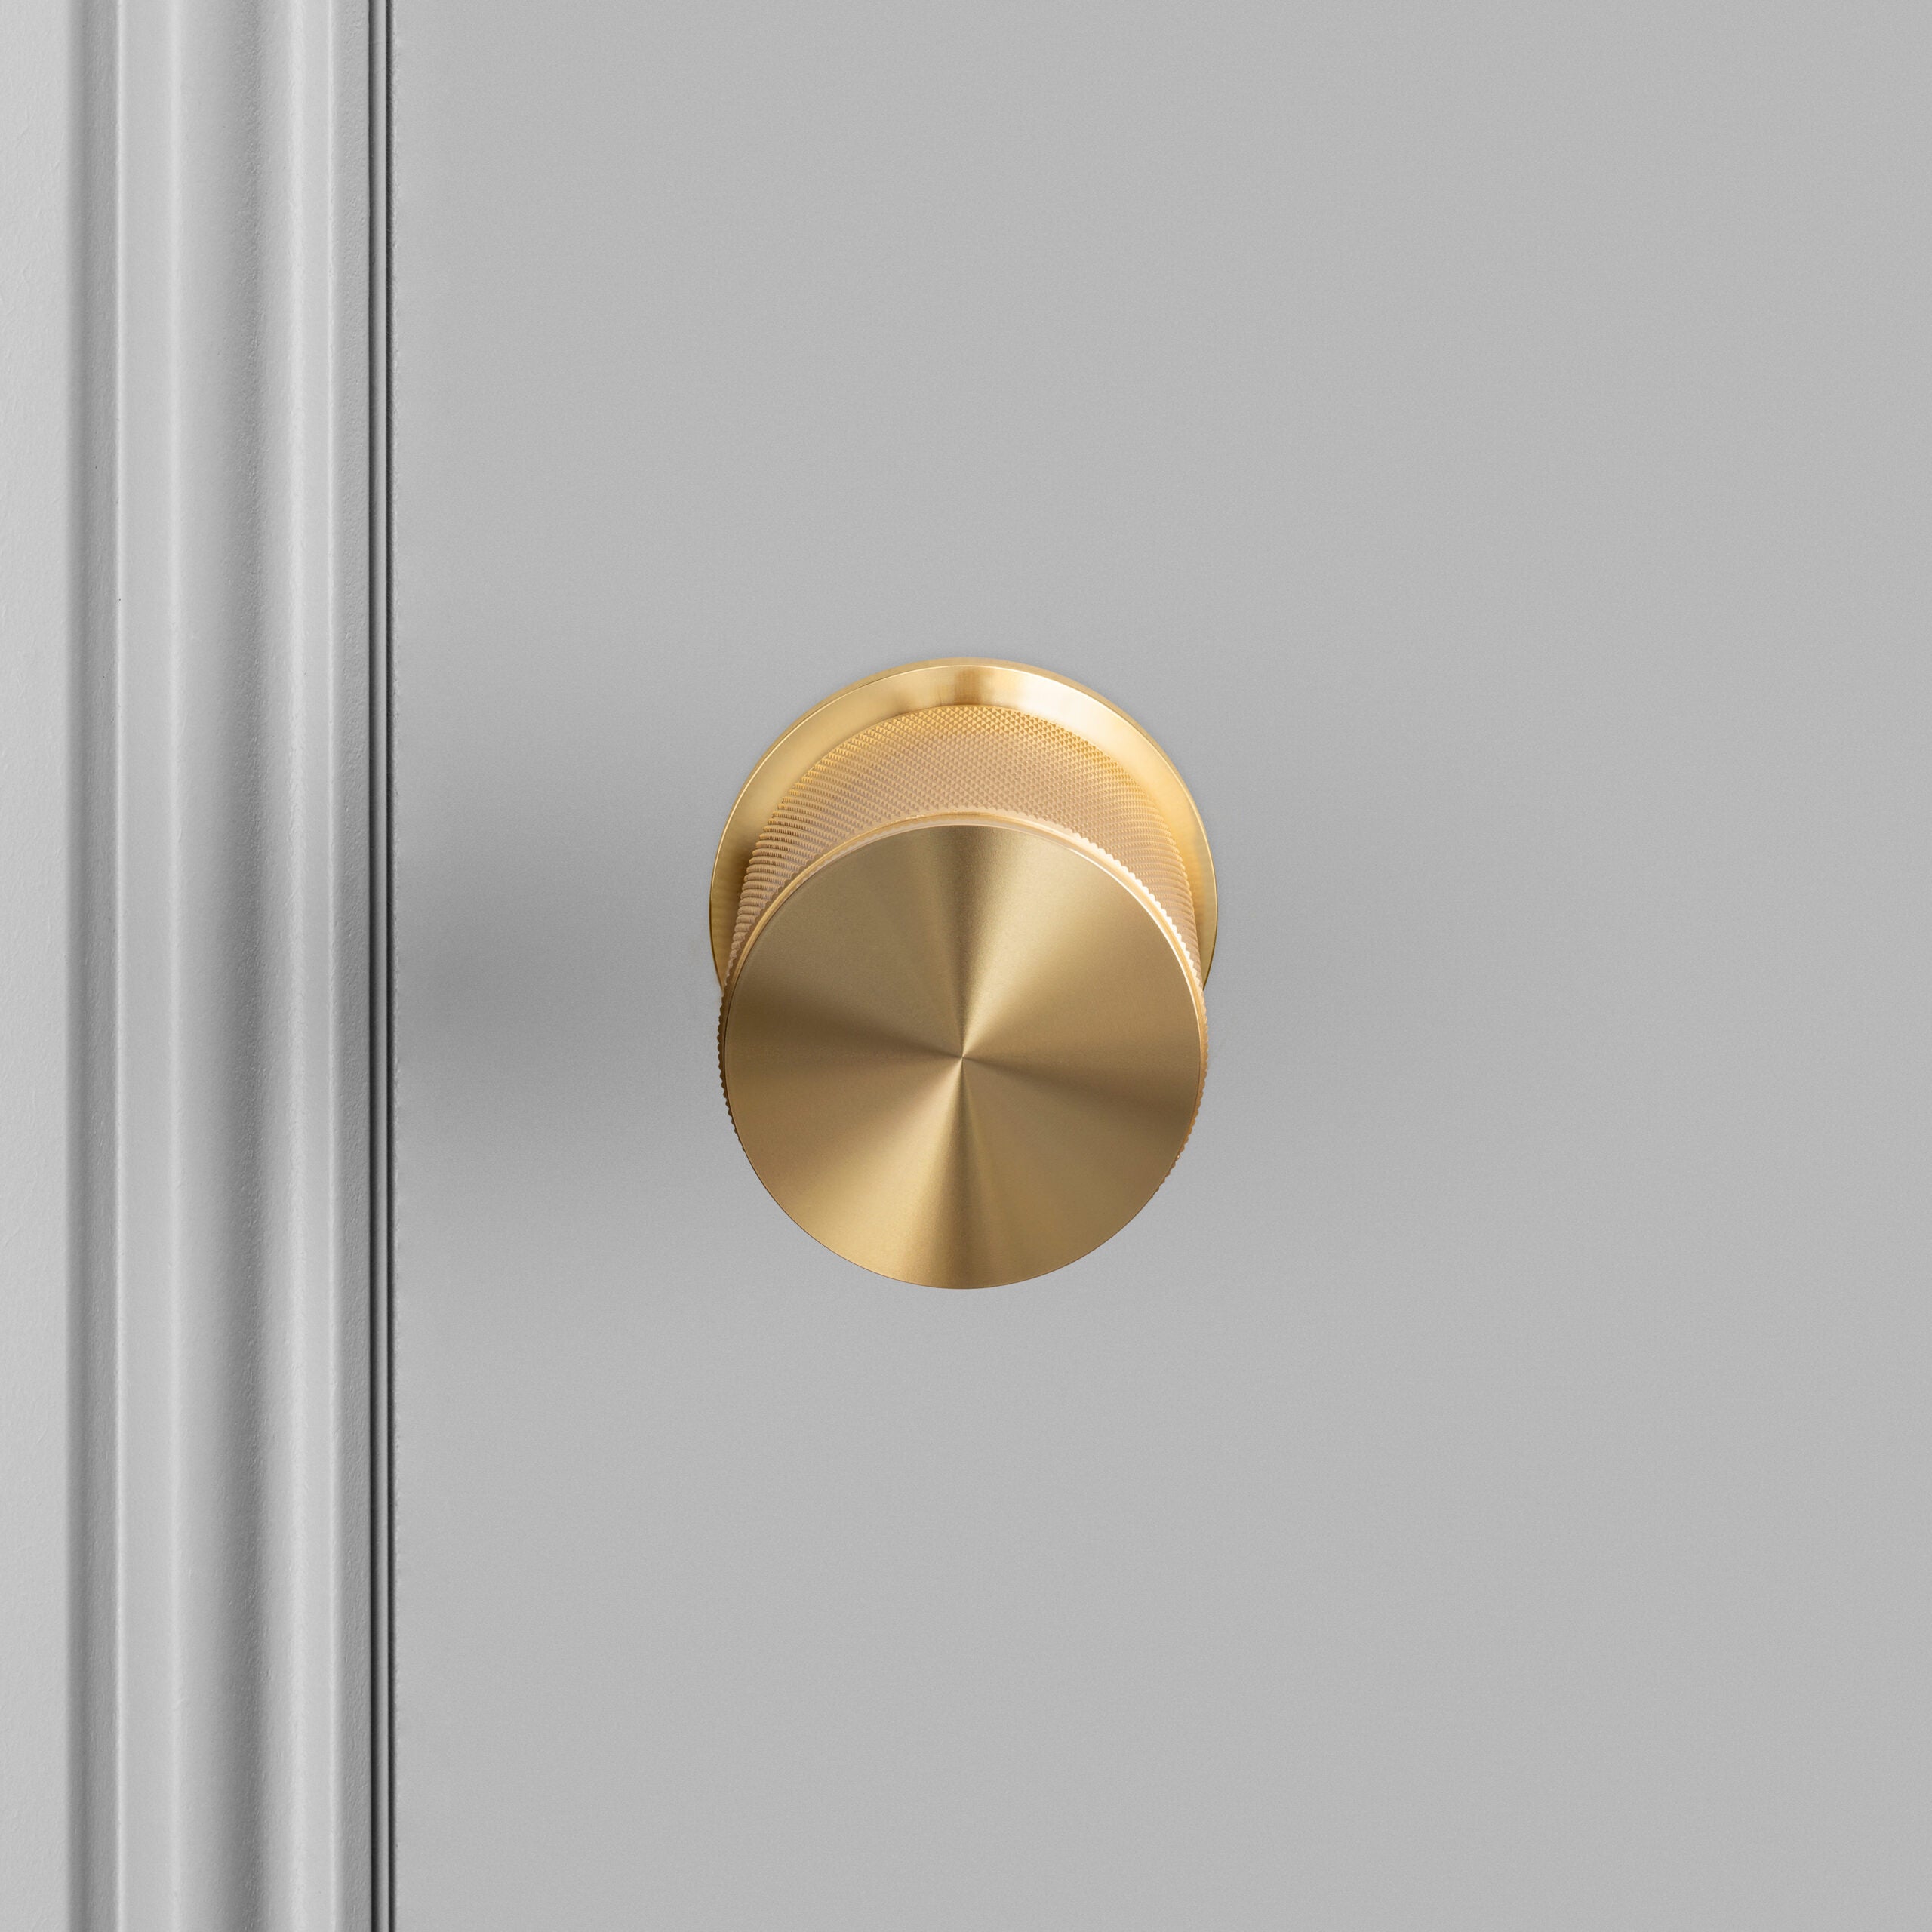 Buster + Punch Door Knob Double Sided, Cross Design, FIXED TYPE Hardware Buster + Punch Brass  